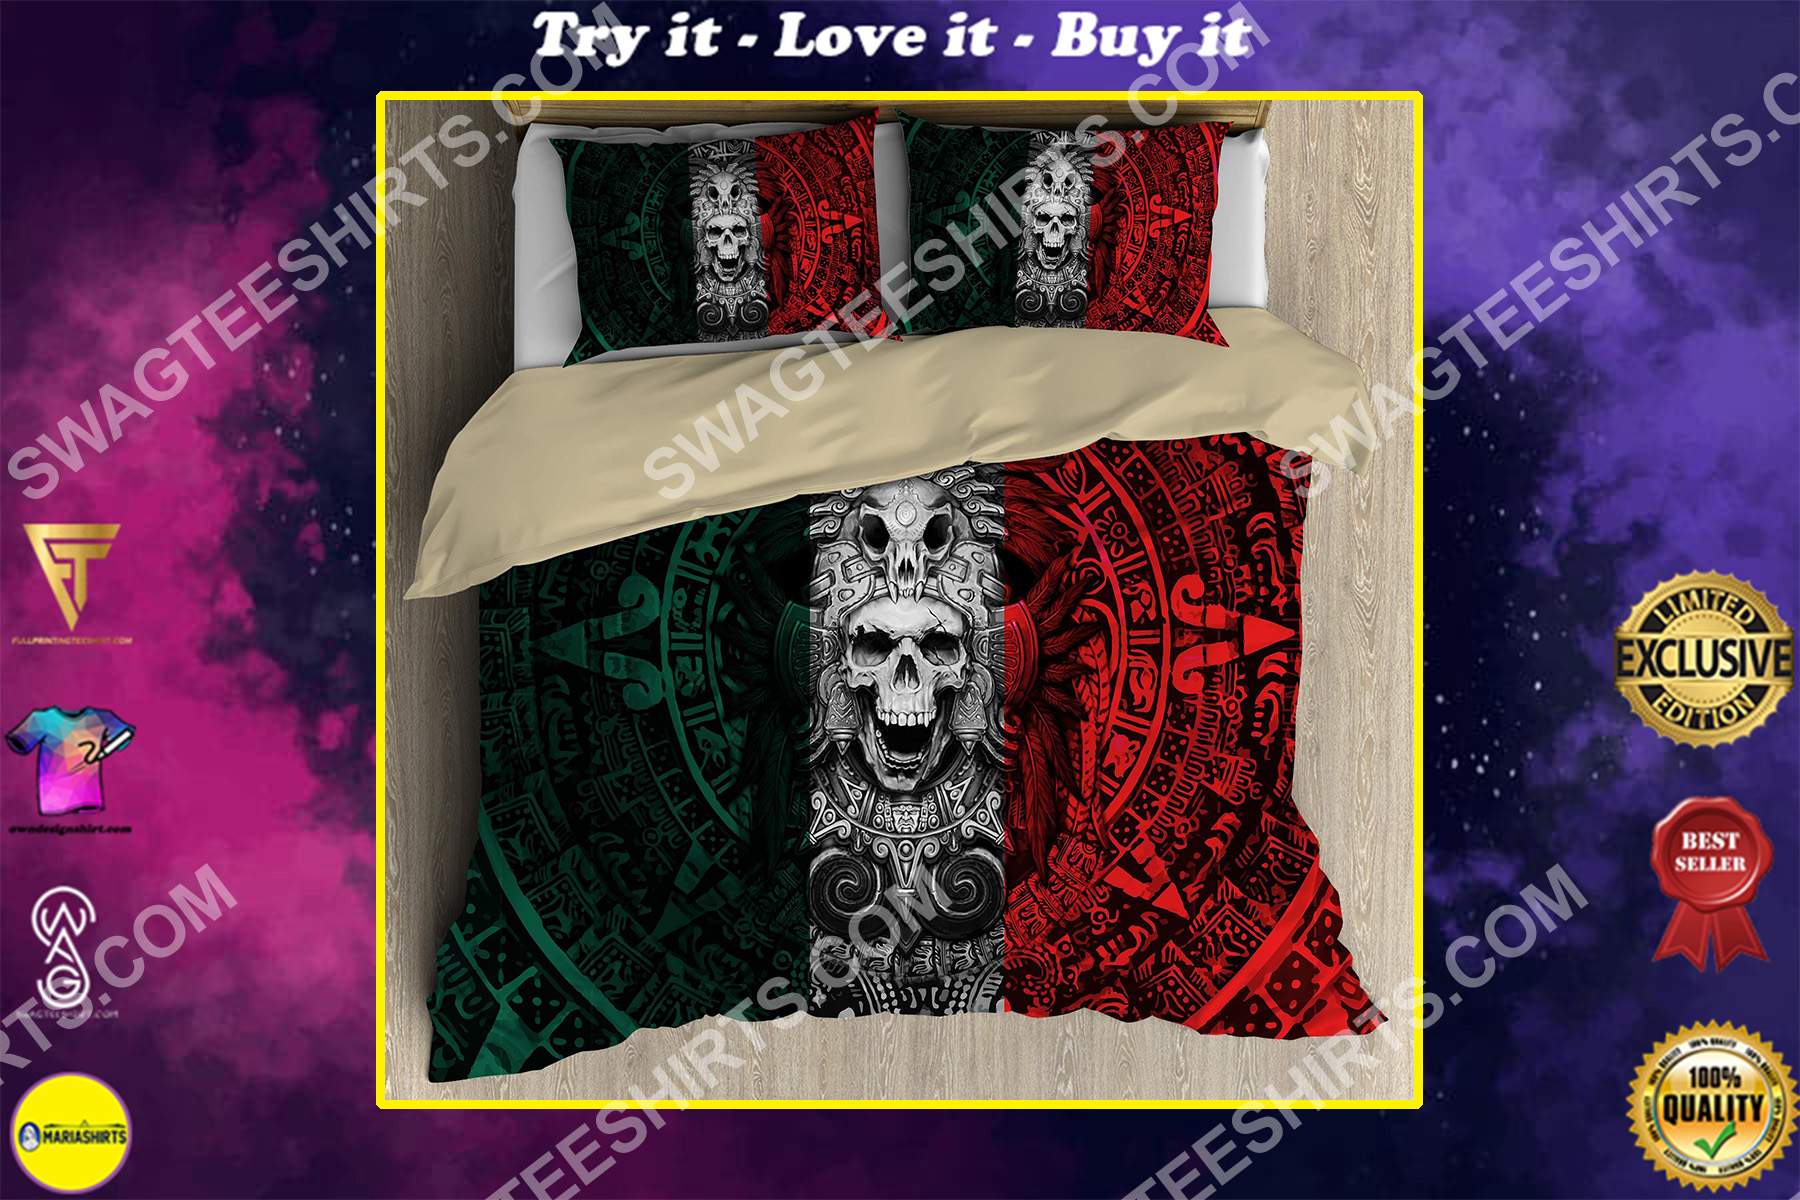 the aztec skull warrior mexico all over printed bedding set